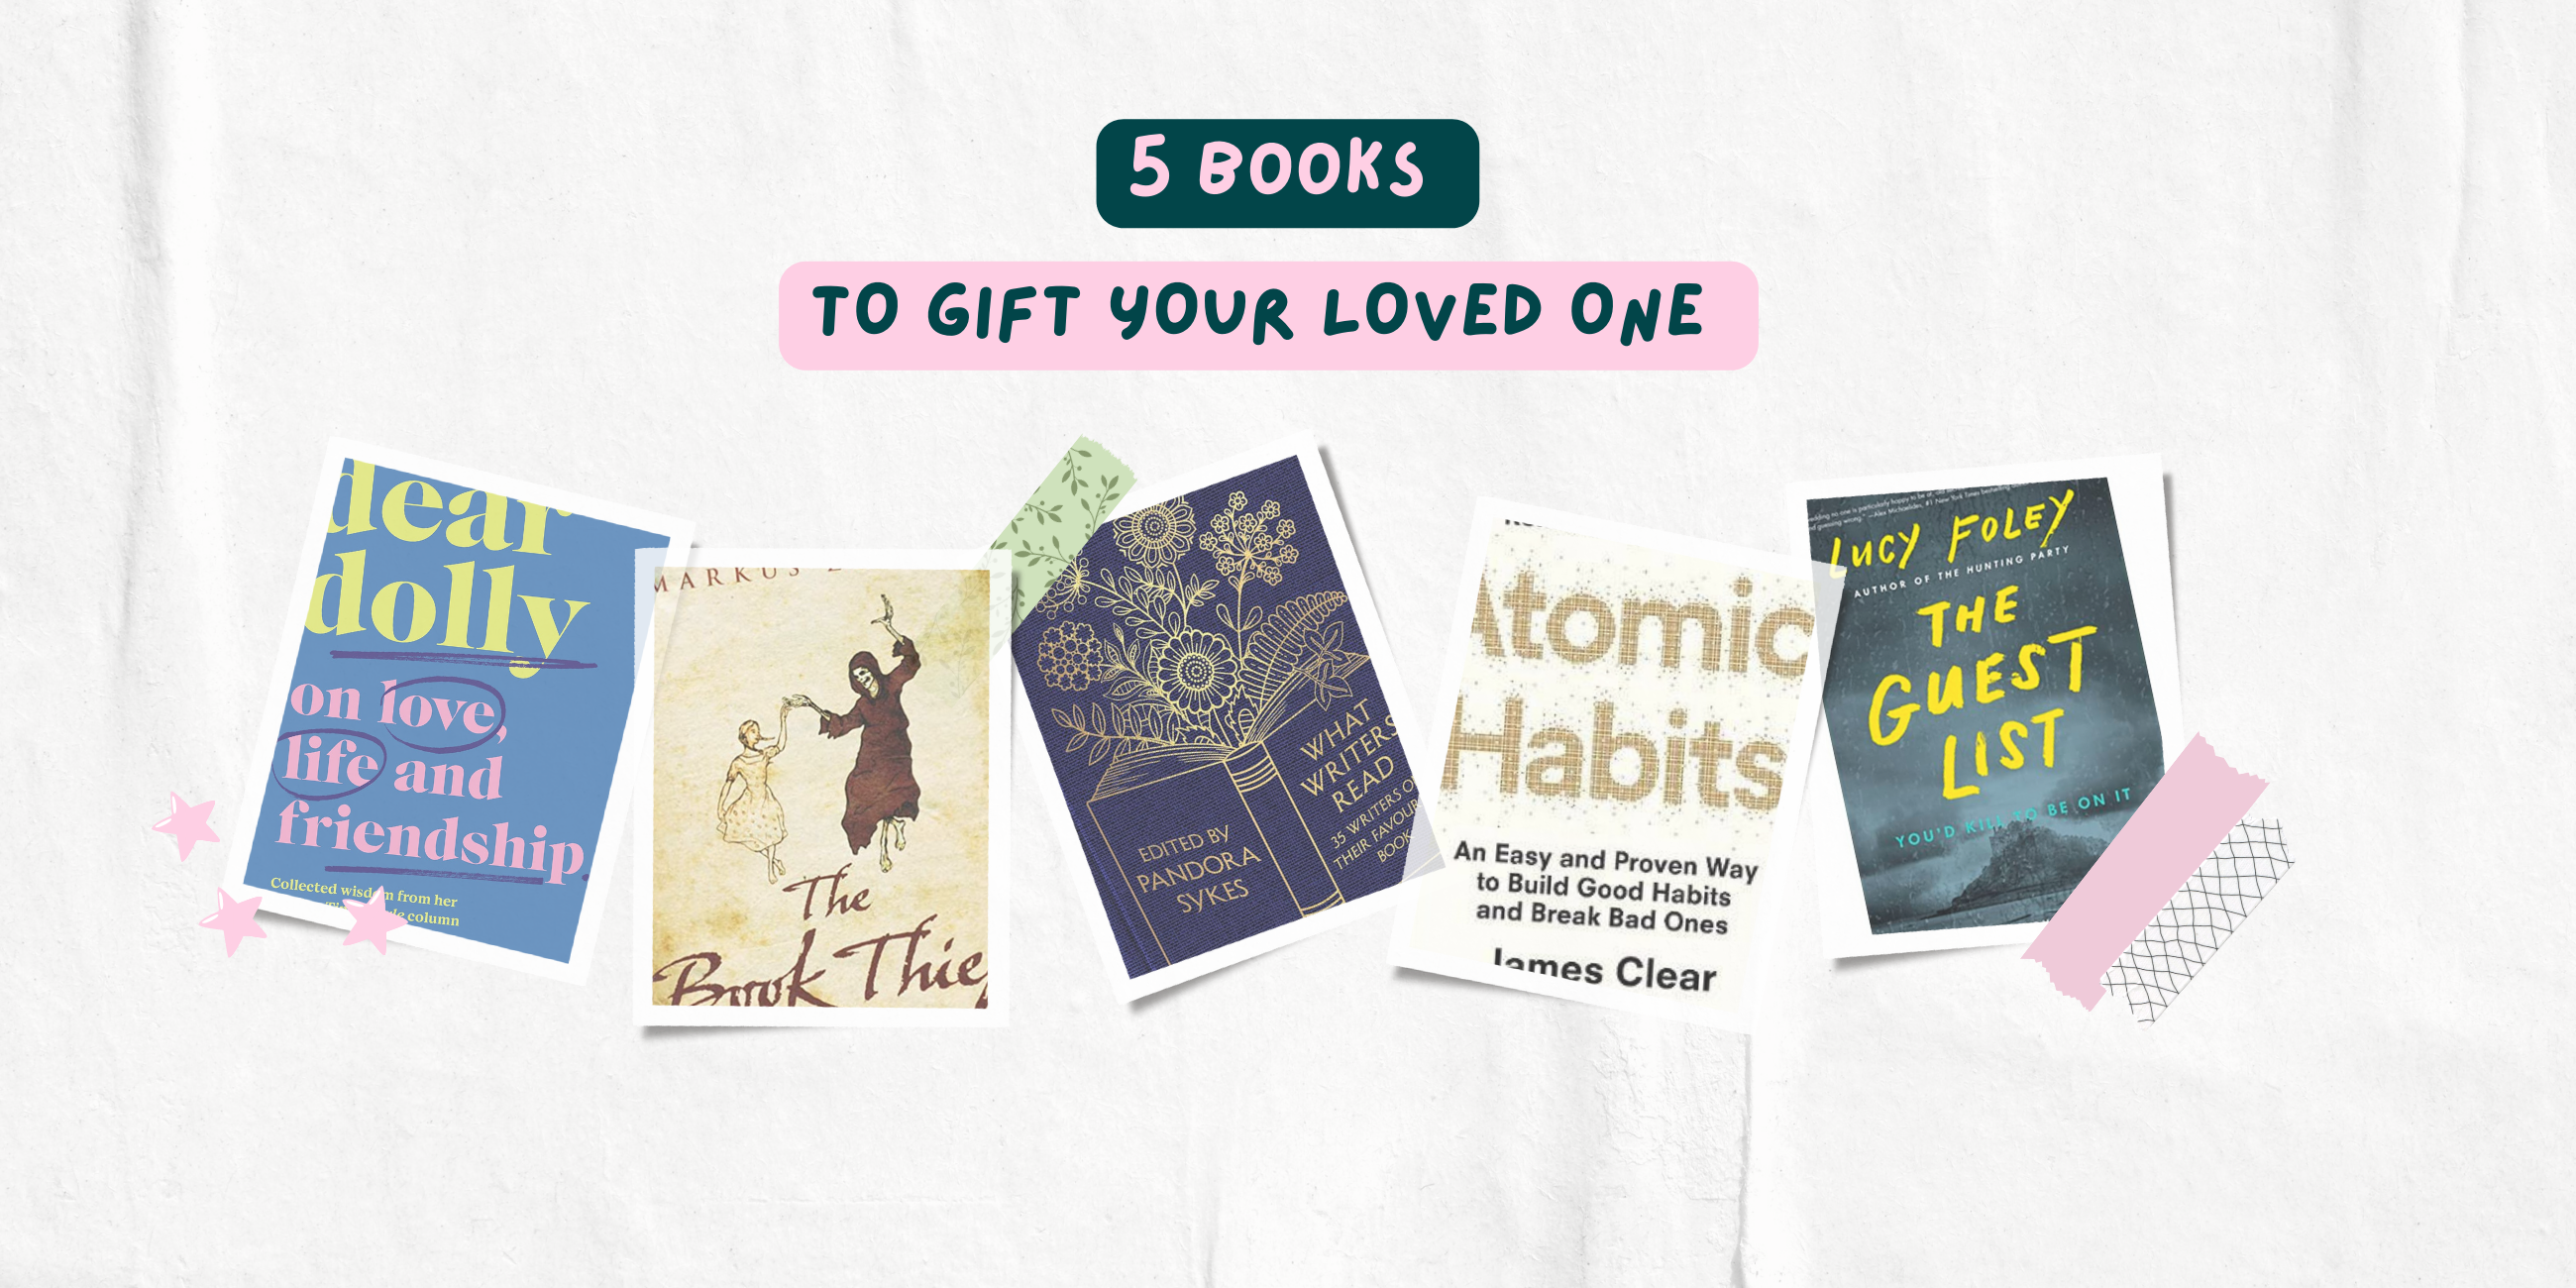 The Literary Gift Company - Gifts for Book Lovers